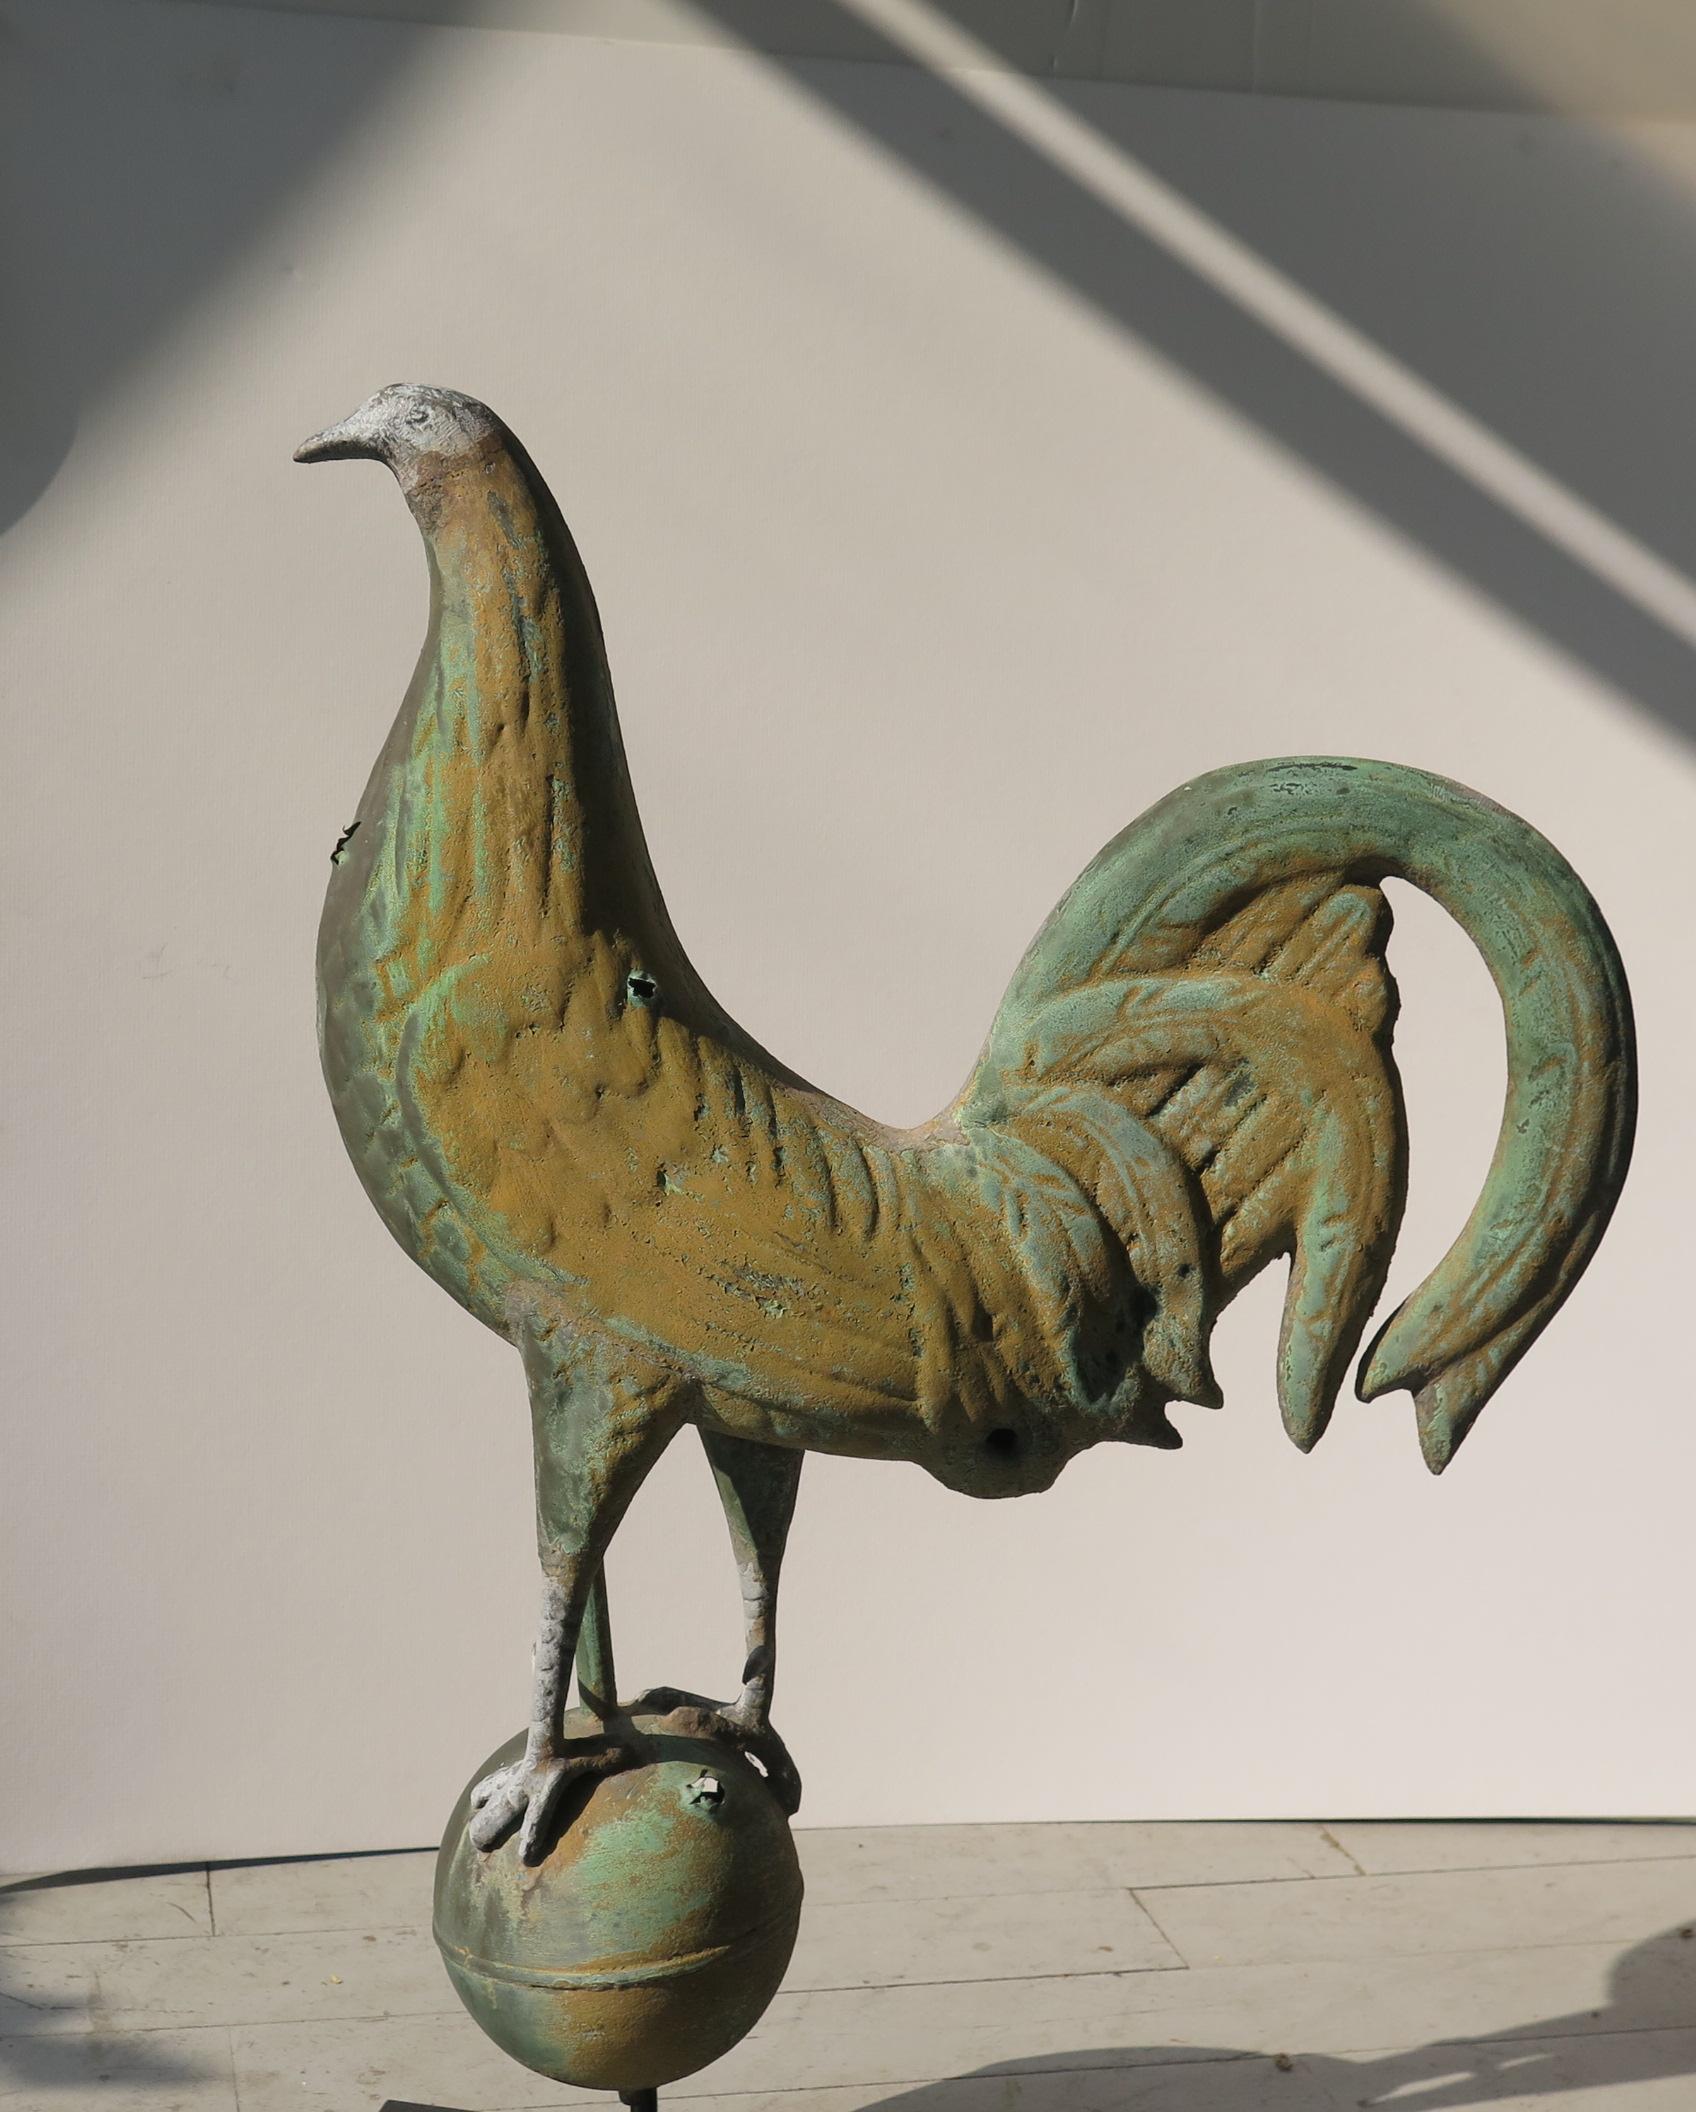 Peafowl weathervane of copper with zinc head on copper ball. Exceptional untouched surface with mustard paint.
There are a few bullet holes when it was made to spin on rooftop but this chicken is a survivor. Metal base and wall bracket included.